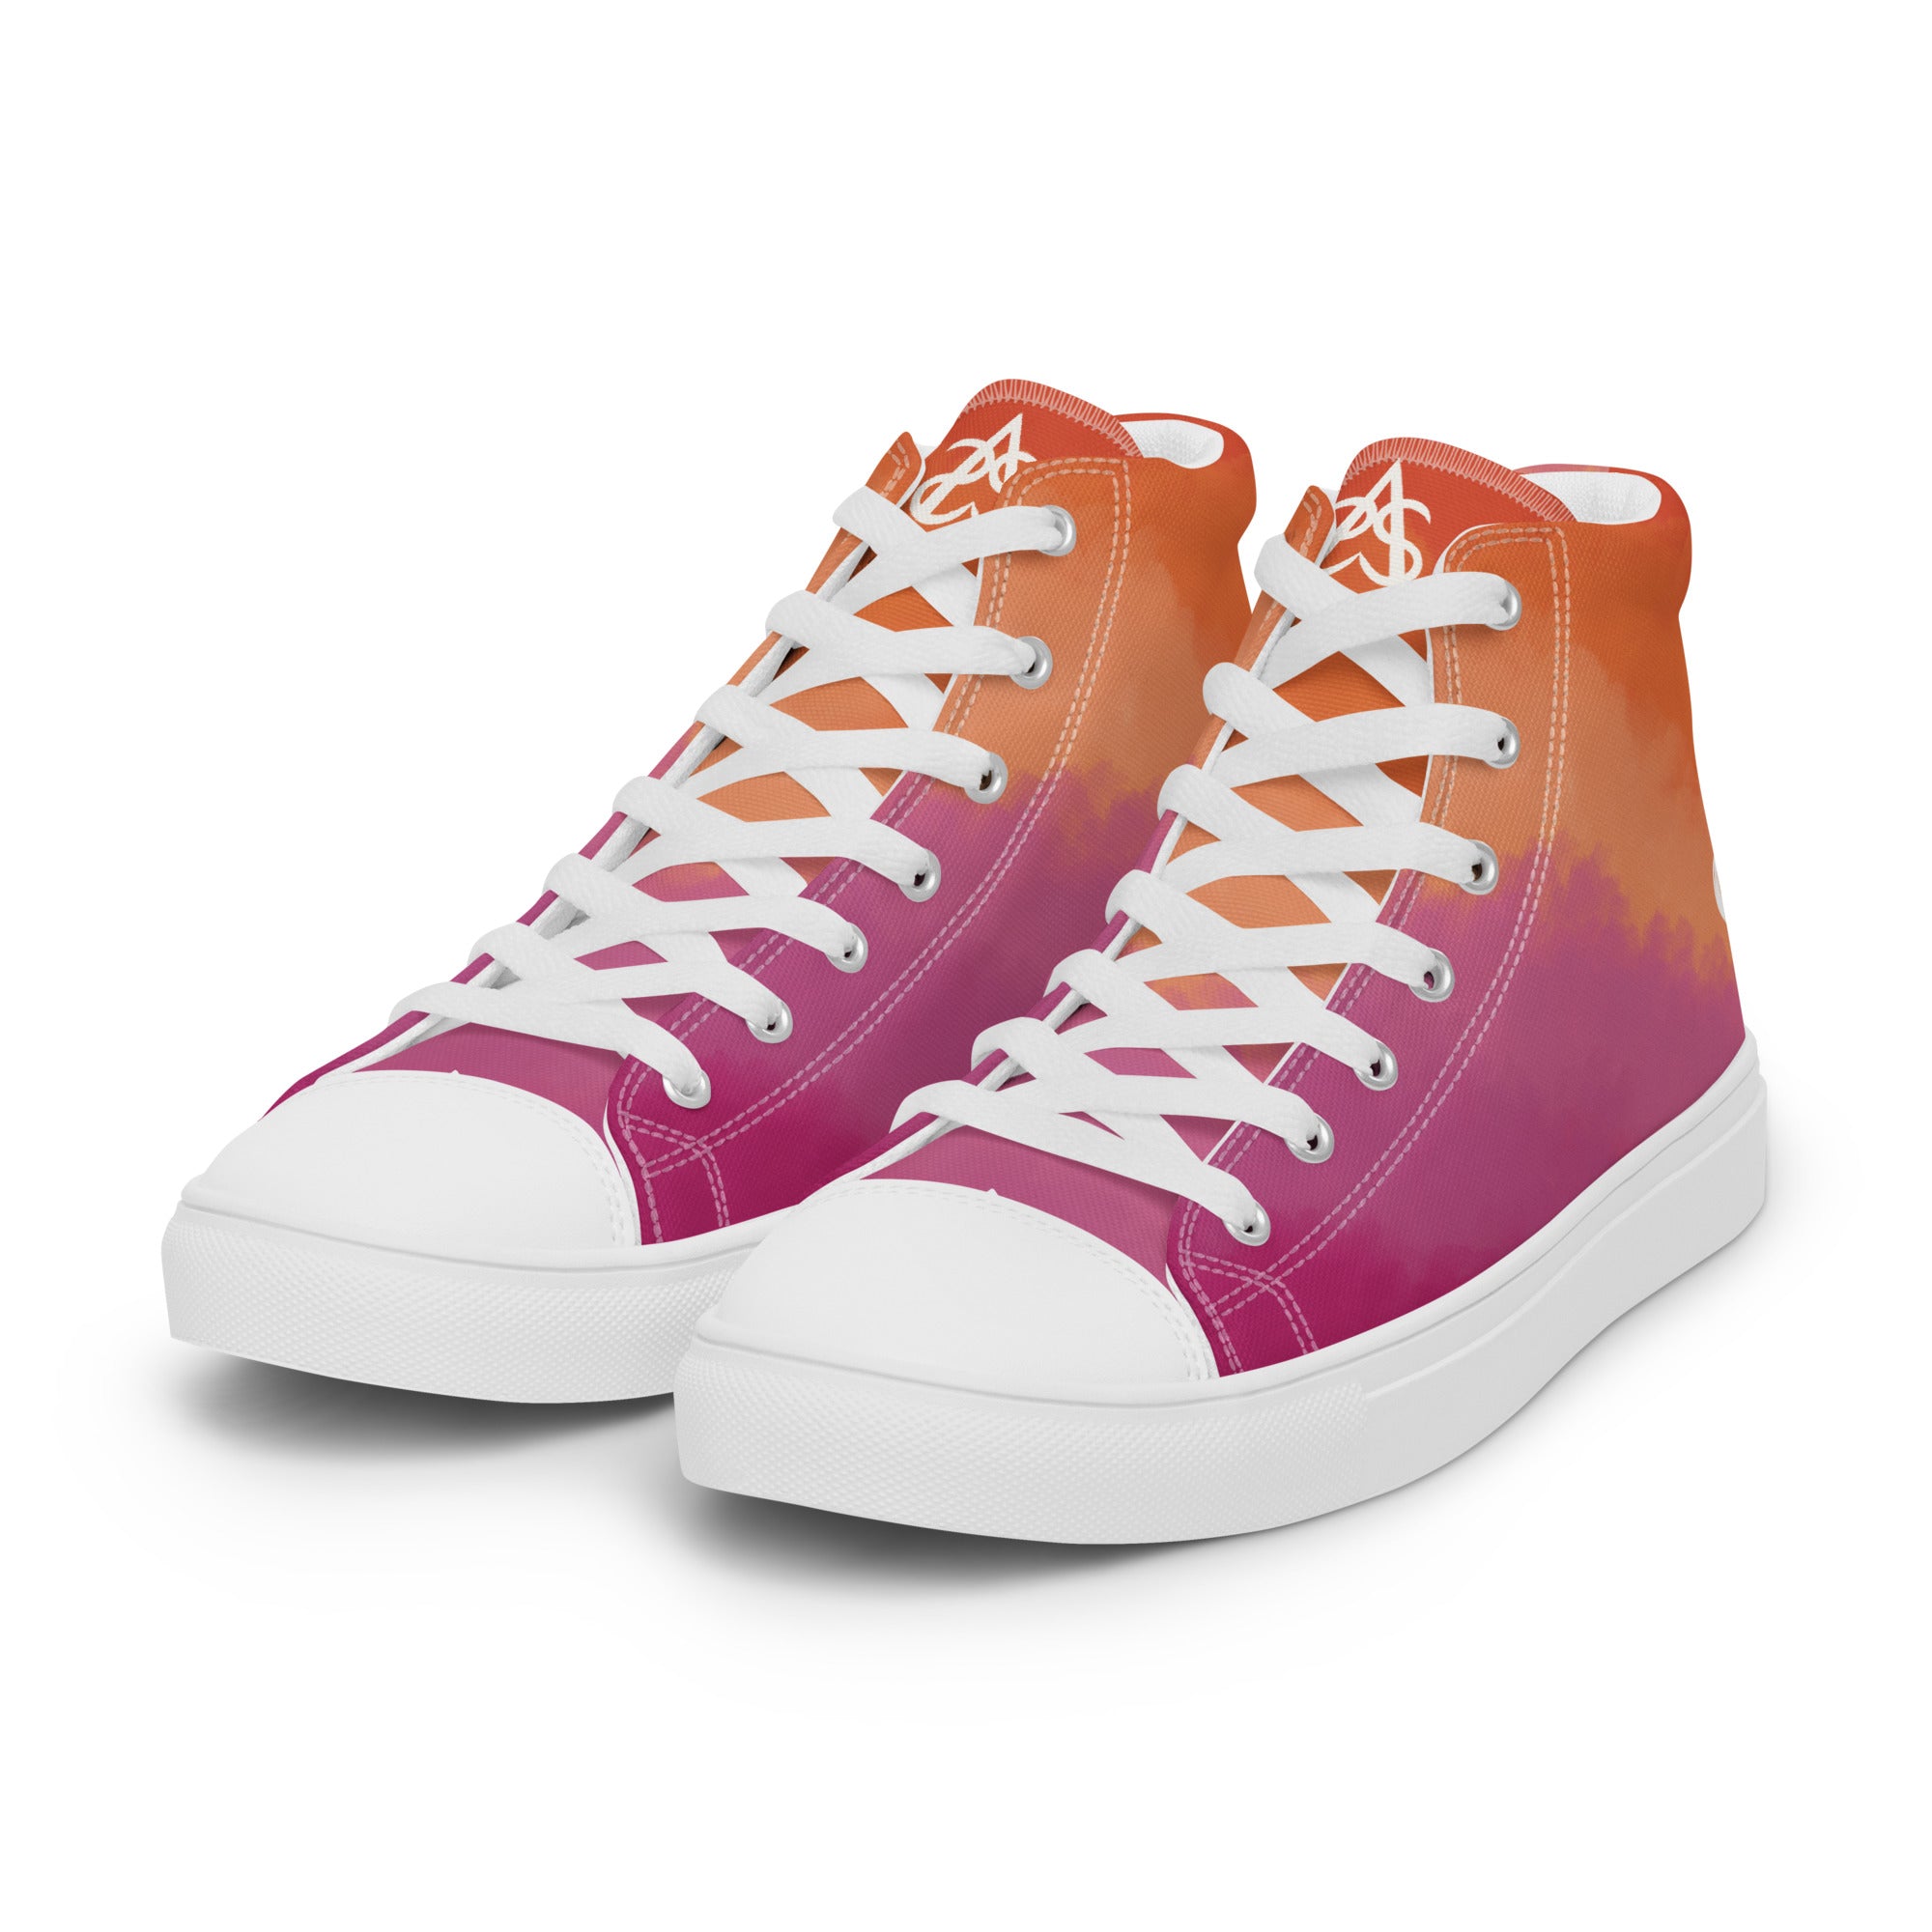 Cloudy Lesbian High Top Canvas Shoes (Masc Sizing)